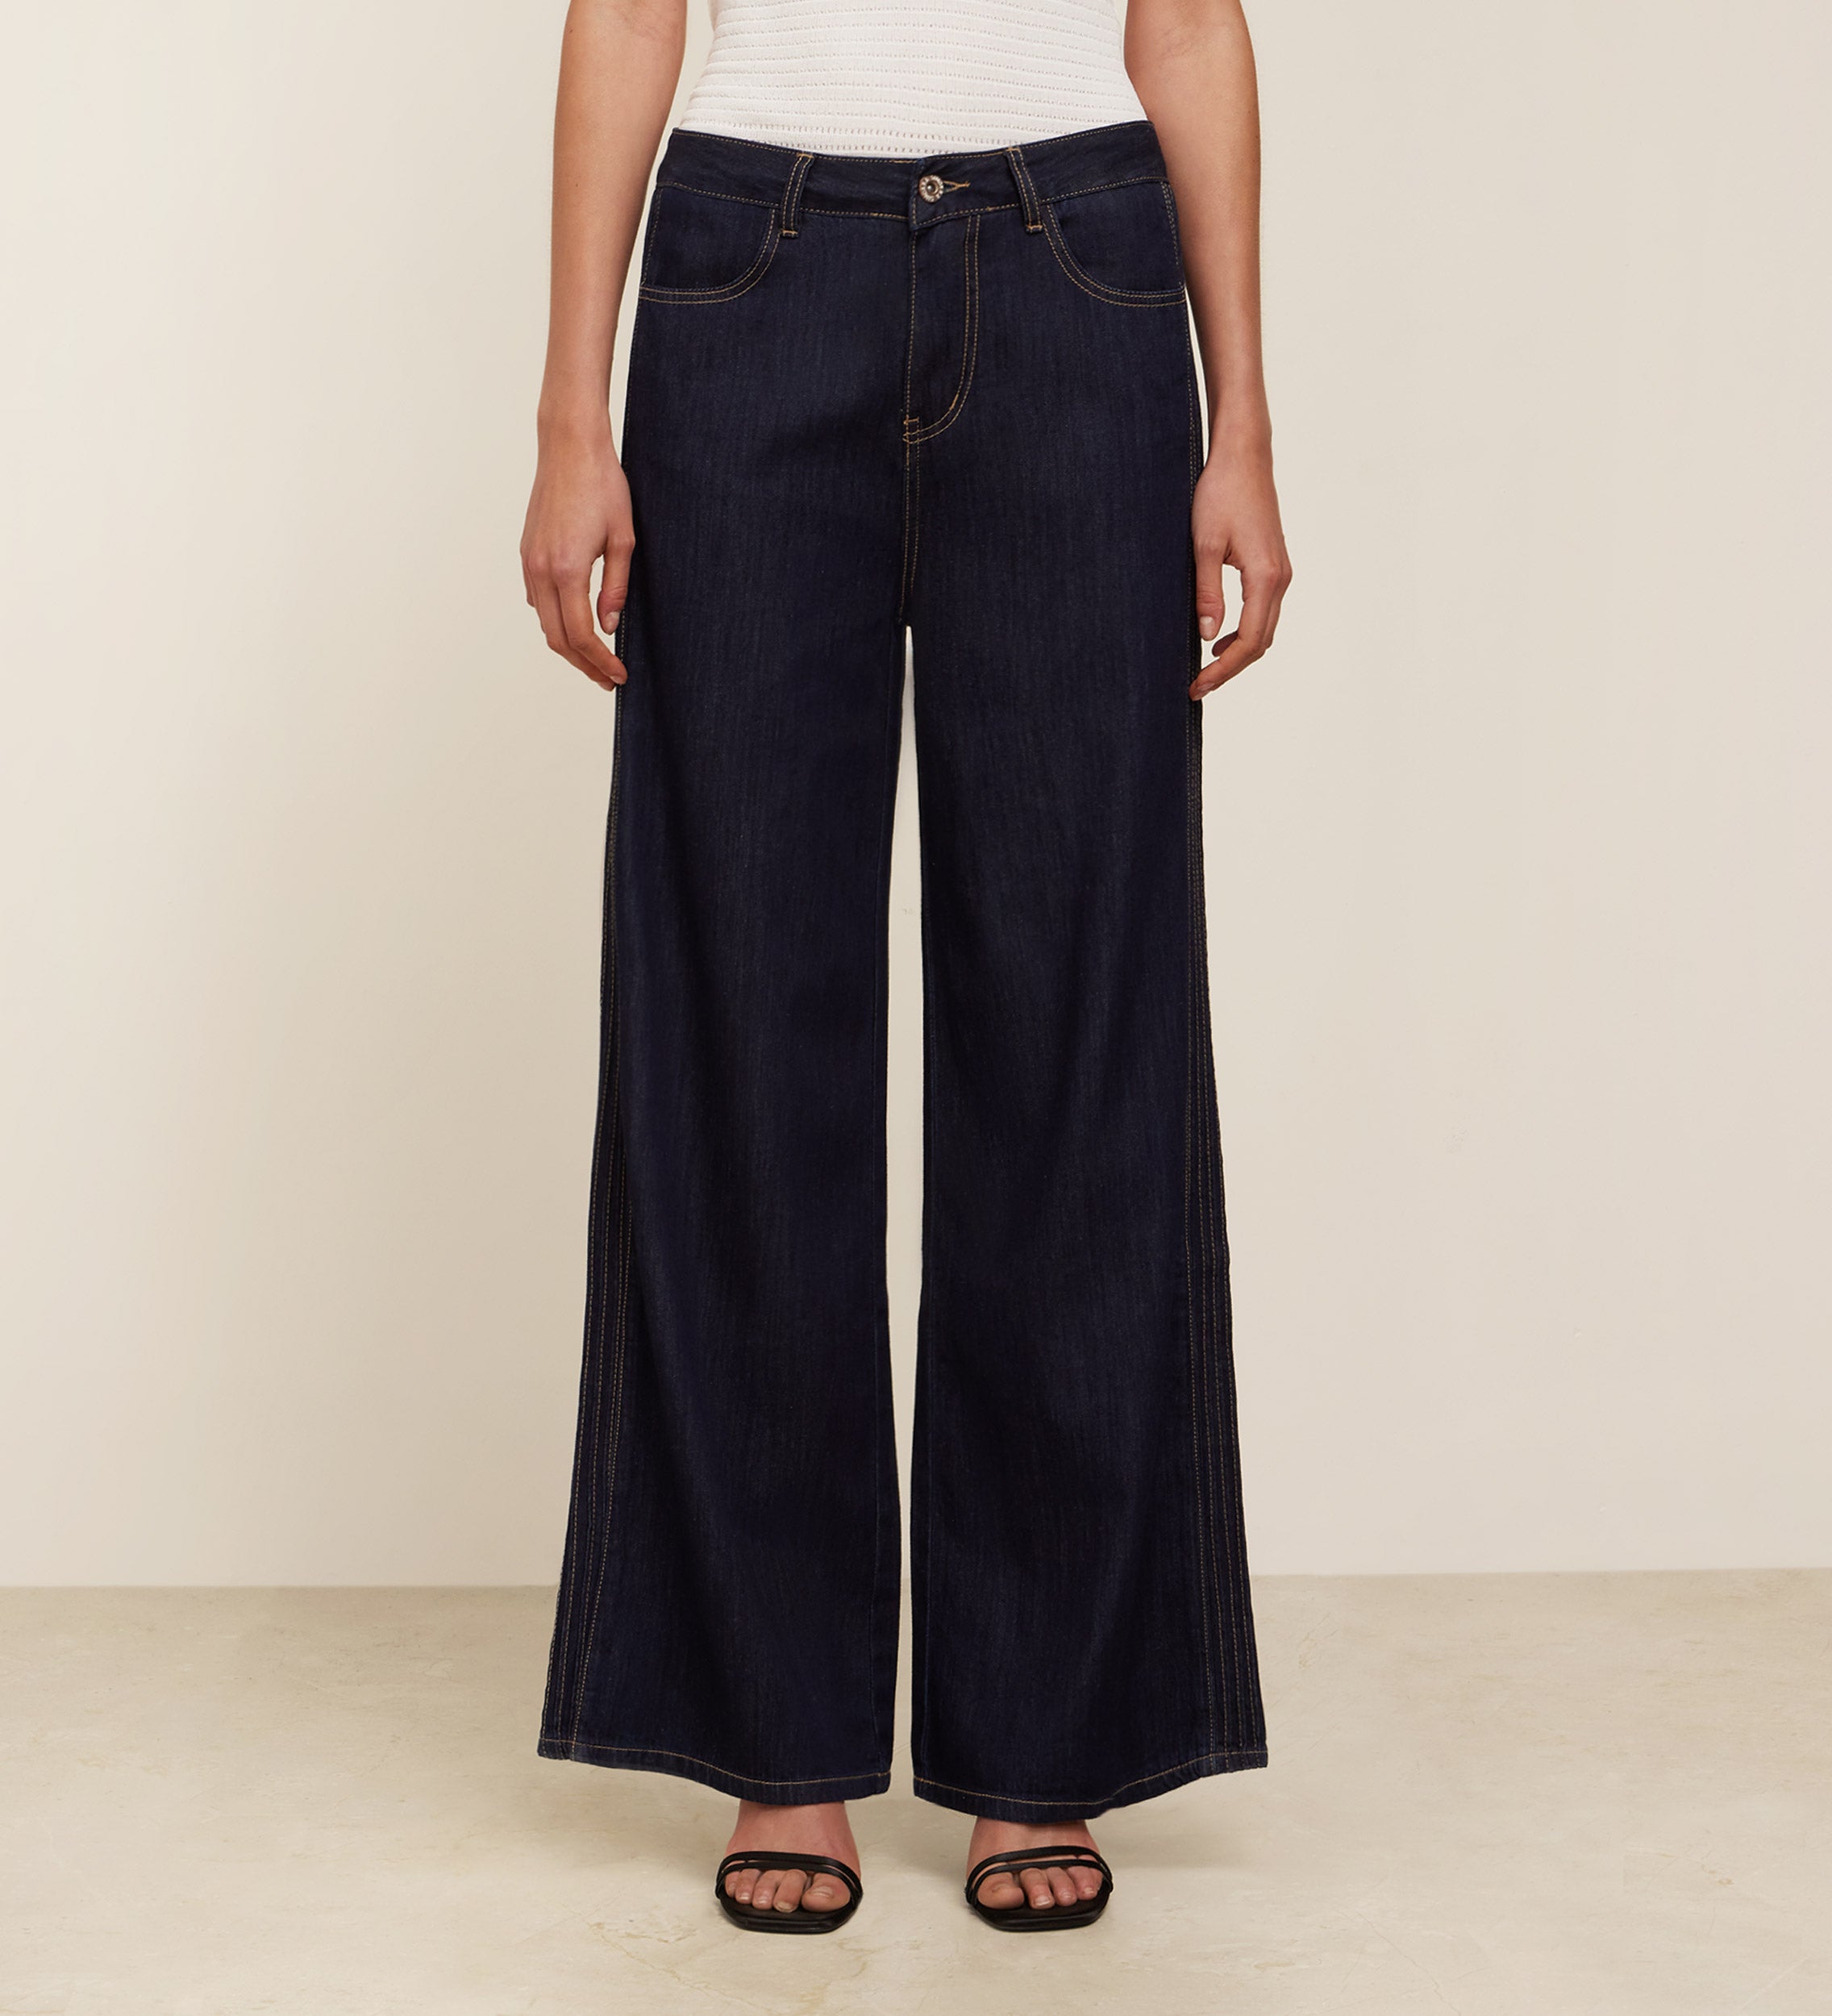 Wide leg pants with drawstrings